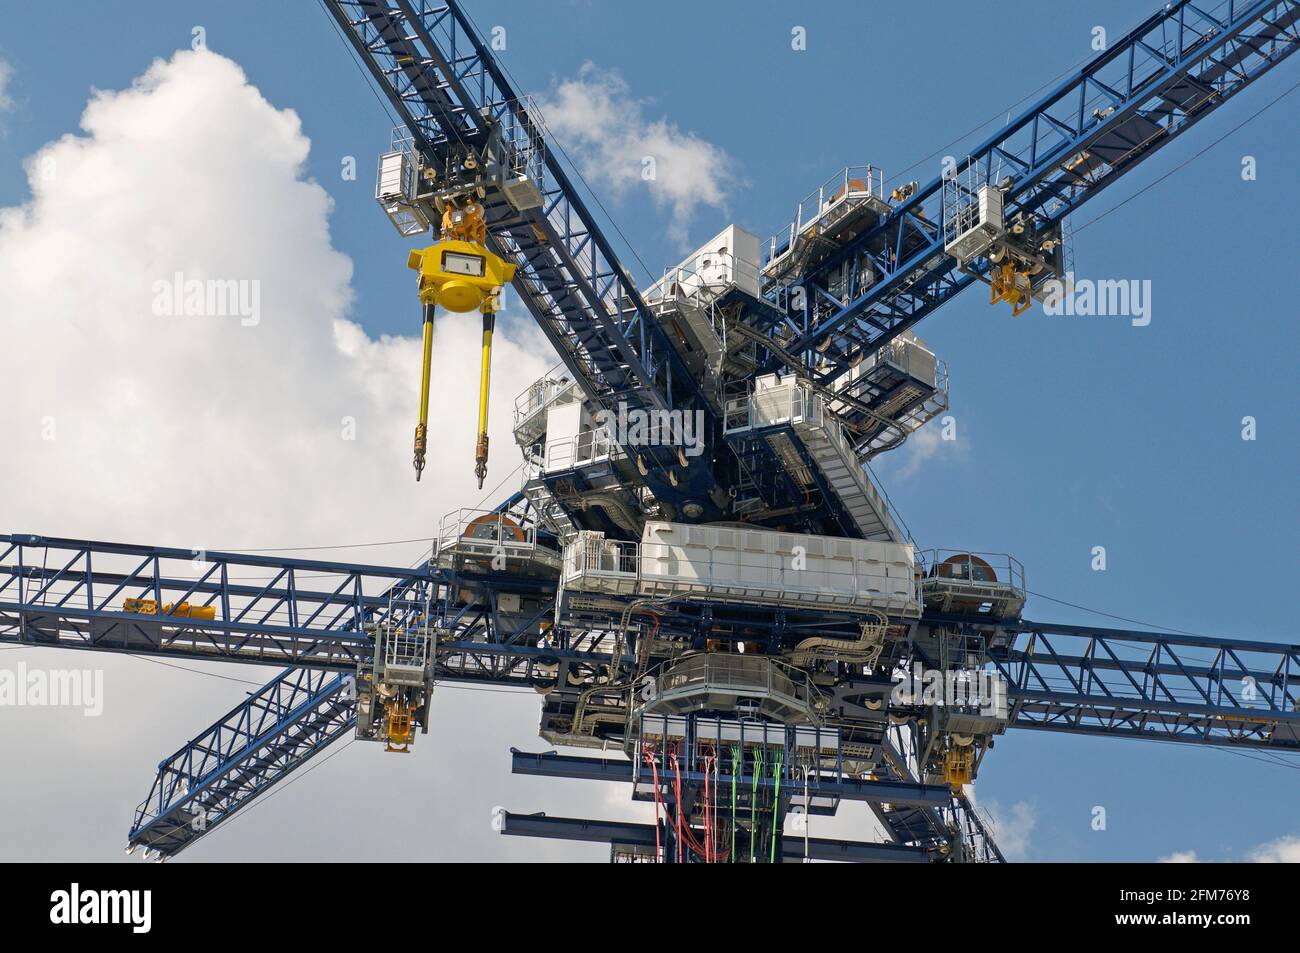 Castione, Switzerland - 26th April 2021 : Closeup of Energy Vault crane tower in Switzerland. Energy Vault is a company specializing in gravity and ki Stock Photo